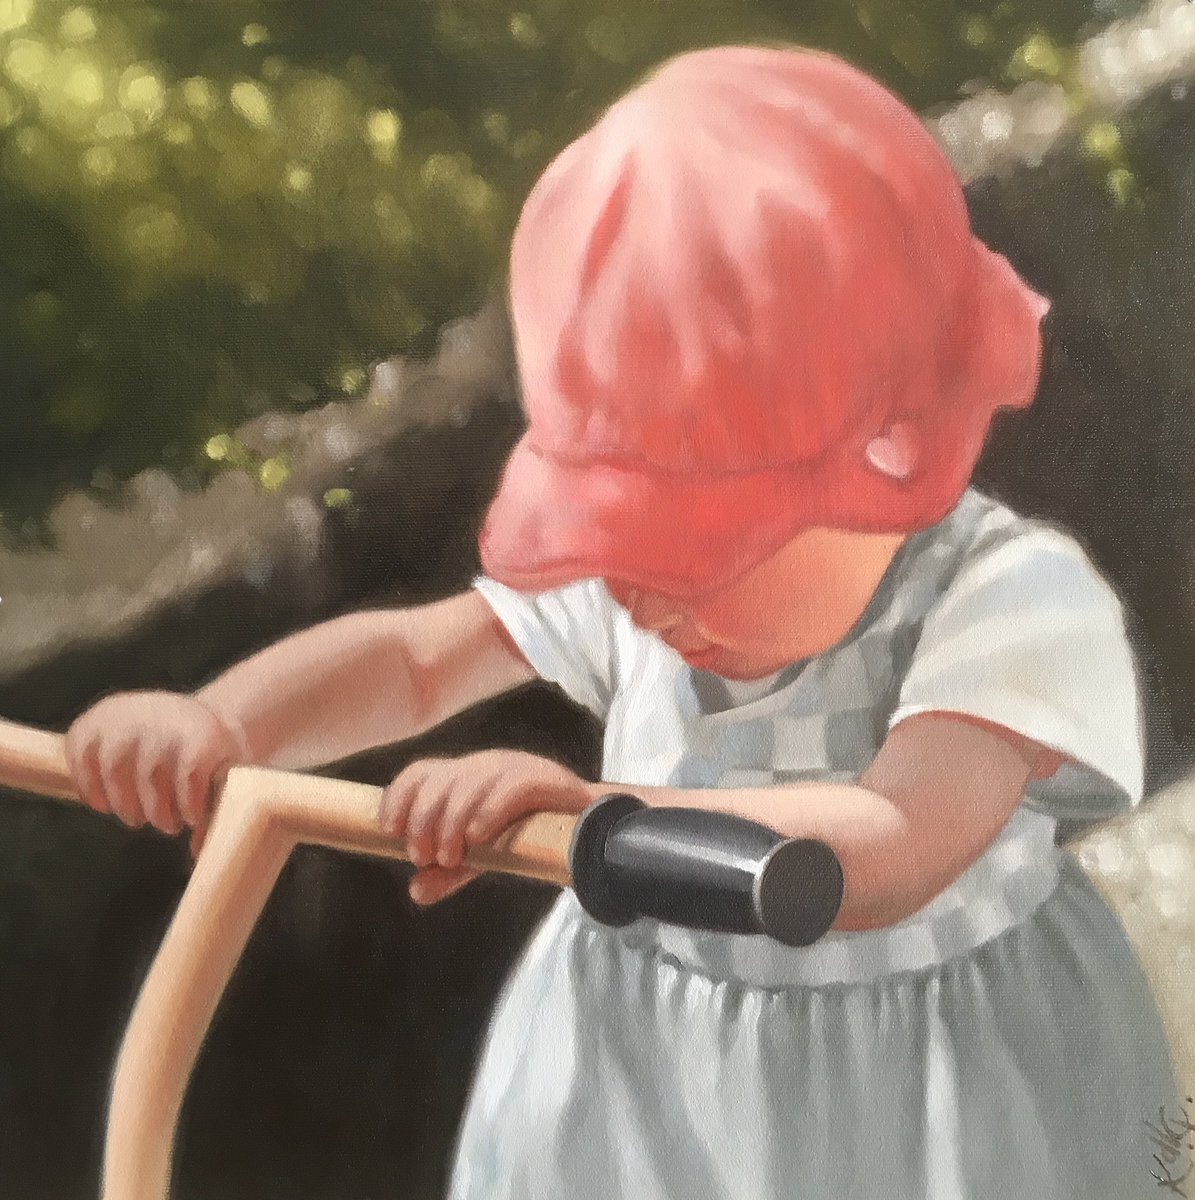 Scooter baby 🛴

A quick colourful alla prima #painting of my 2nd daughter many moons ago💓

#oilpainting #portrait #peinture #peintre #artist #artistsontwitter #womanartist #workingmother #daughter #baby #WomensArt #allaprima #study #MondayMotivaton